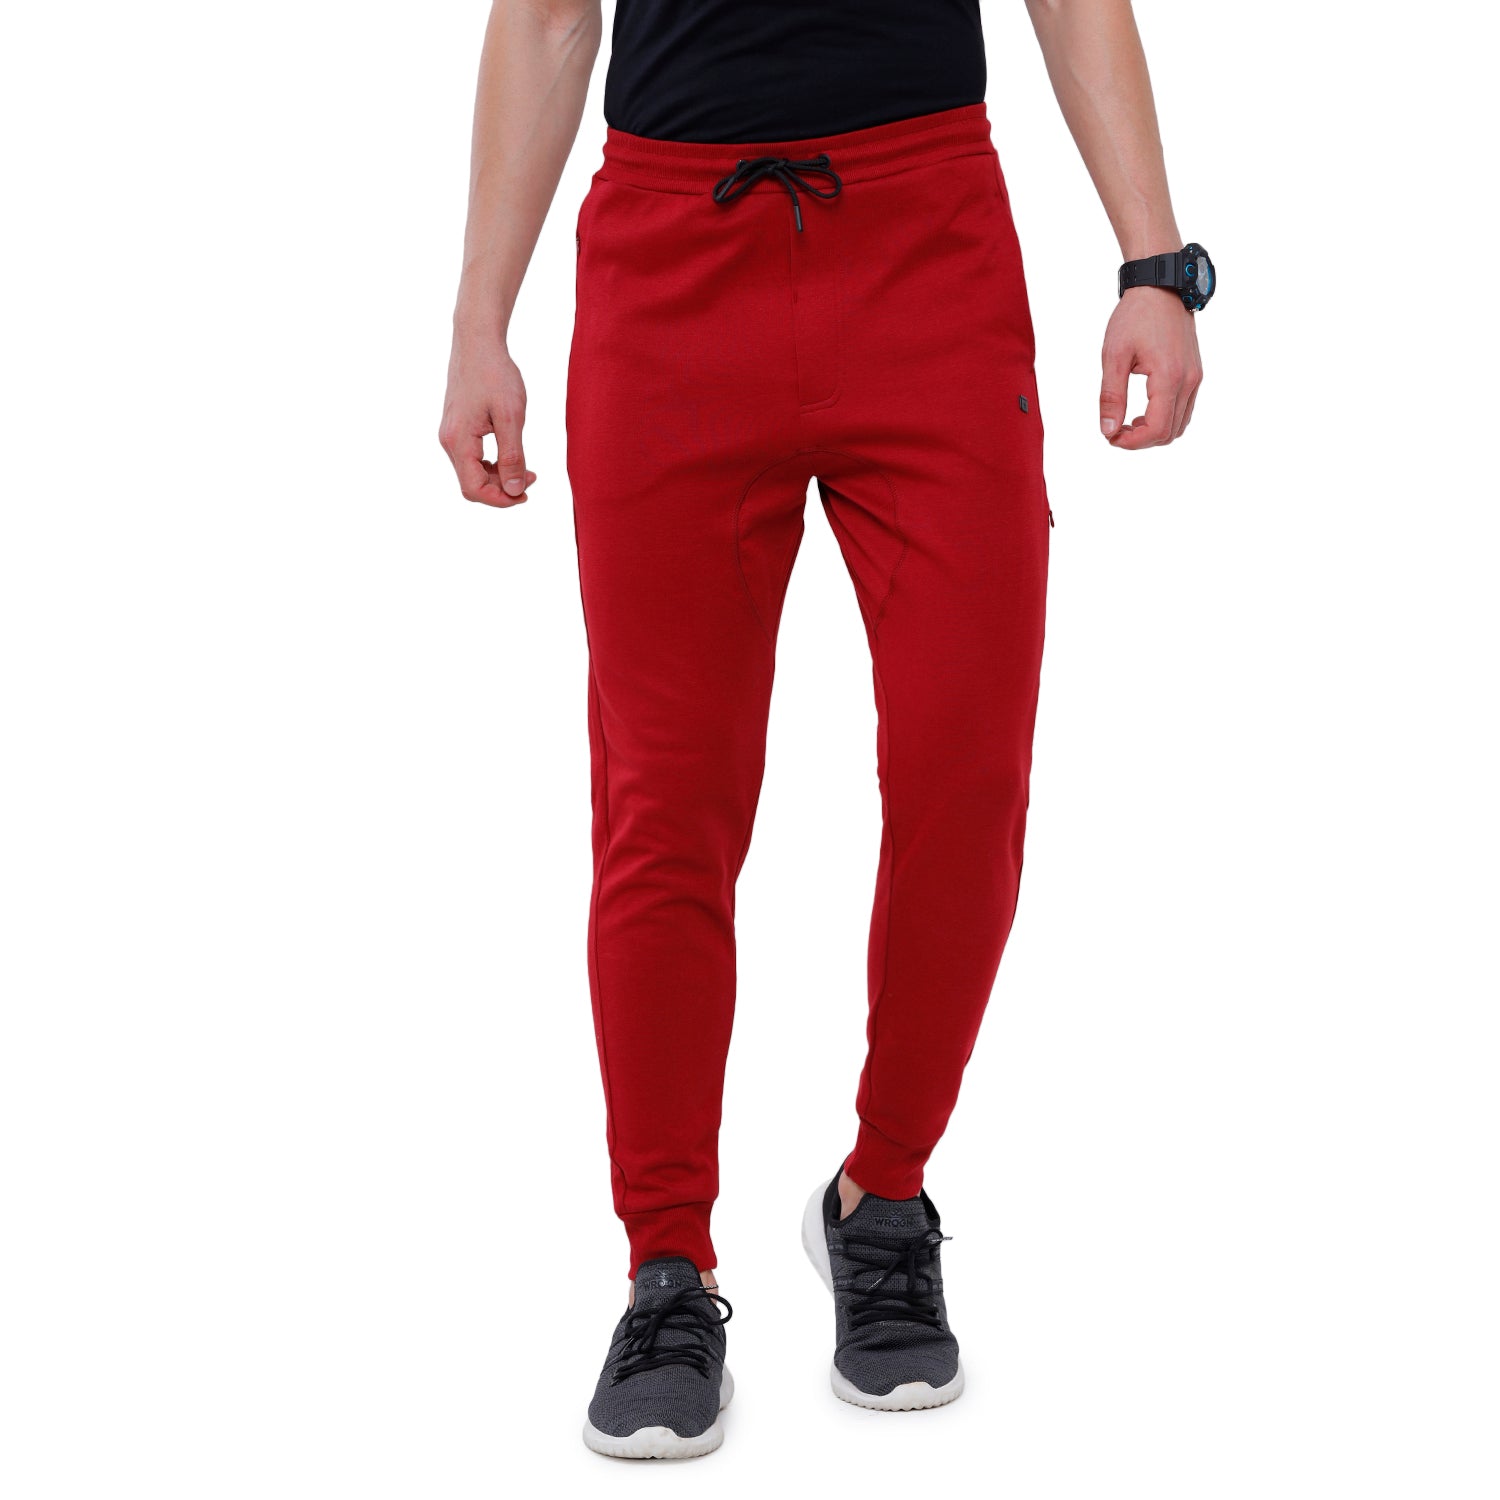 Classic Polo Men's Red Solid Mélange Slim Fit Stylish Jogger Pant - Gioz-03 A Track Pants Classic Polo 